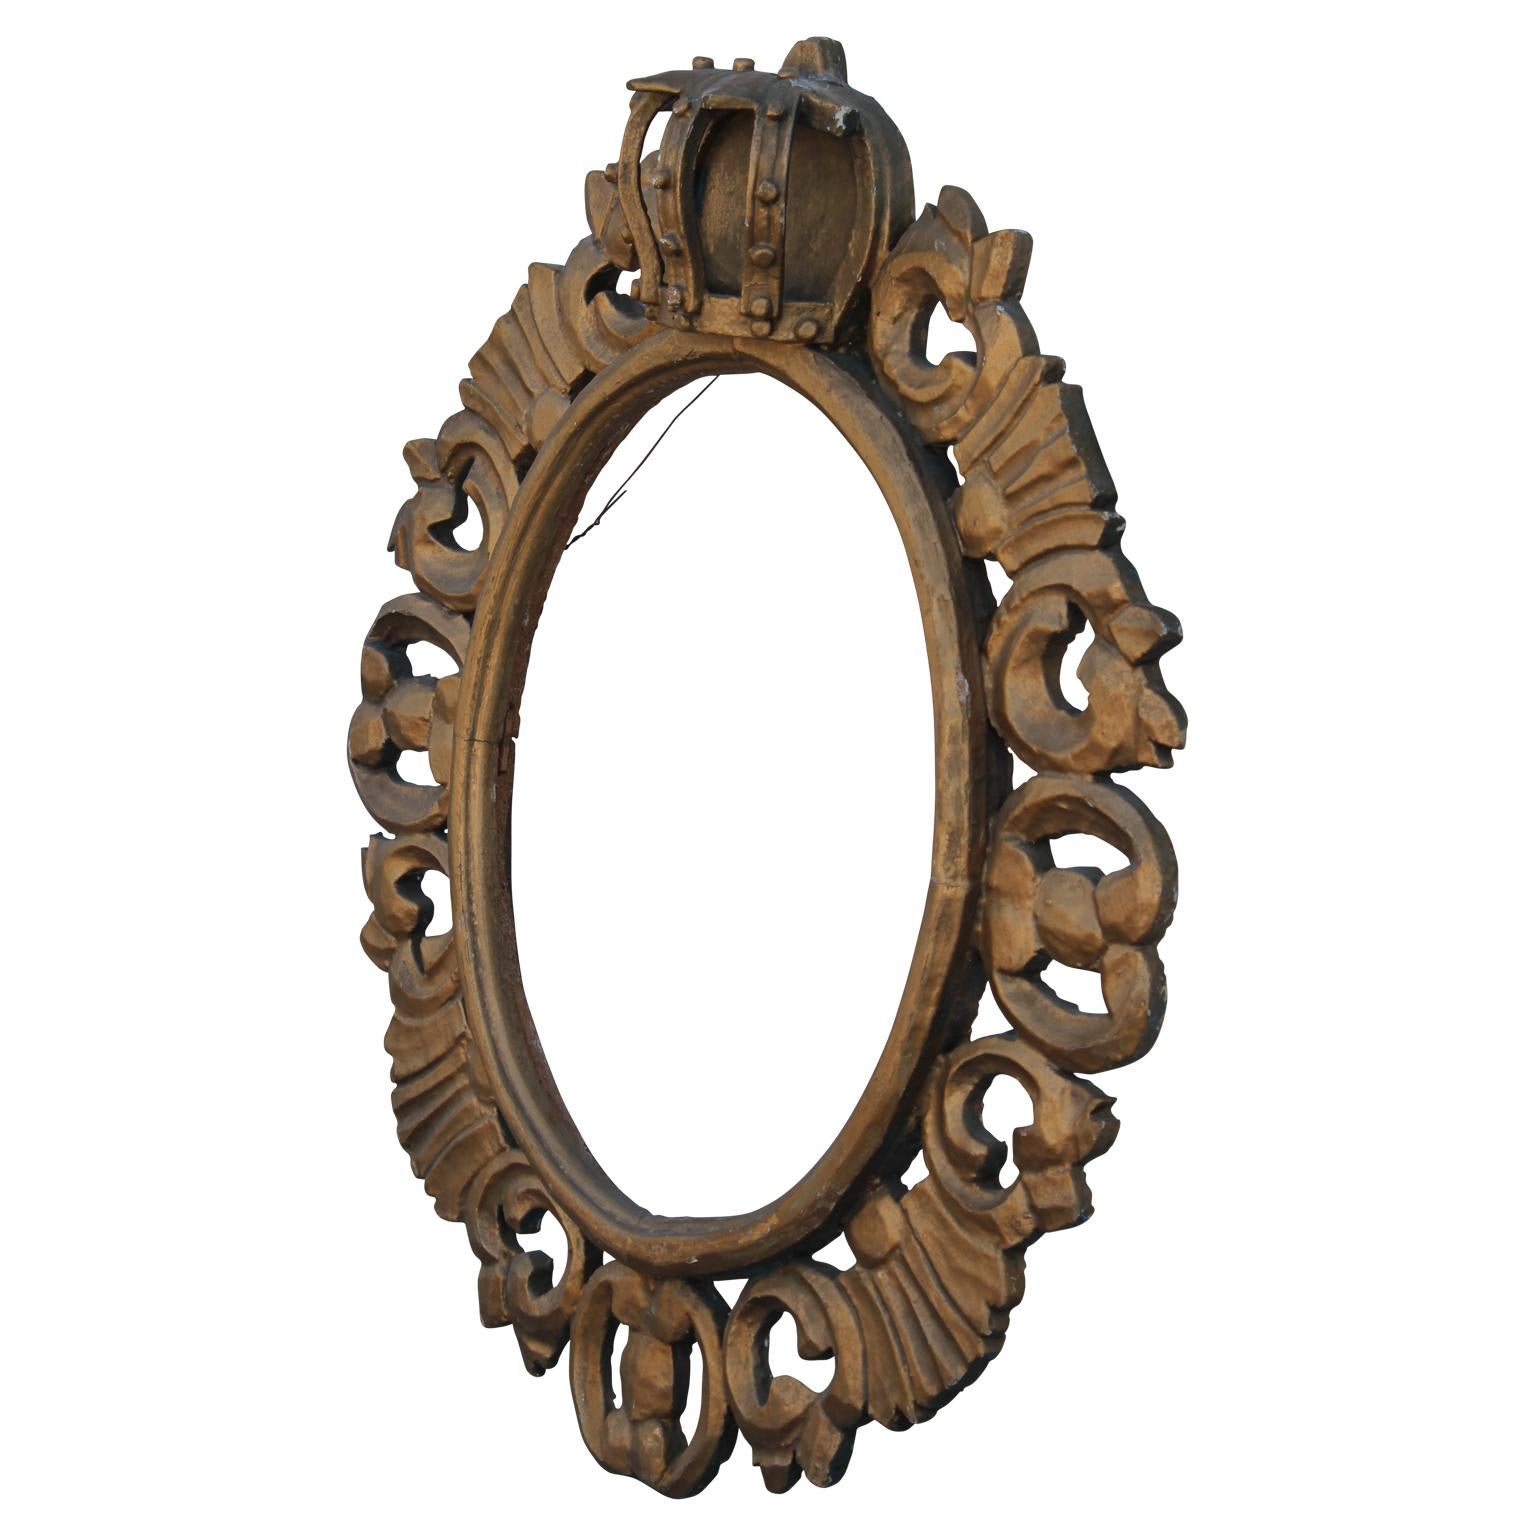 Beautiful gold continental oval frame from the 19th century. It is covered in carved detailing with acanthus leaves and a large crown at the top.
It could easily be used as a picture frame or mirror frame.

Frame dimensions:
Outside H 32